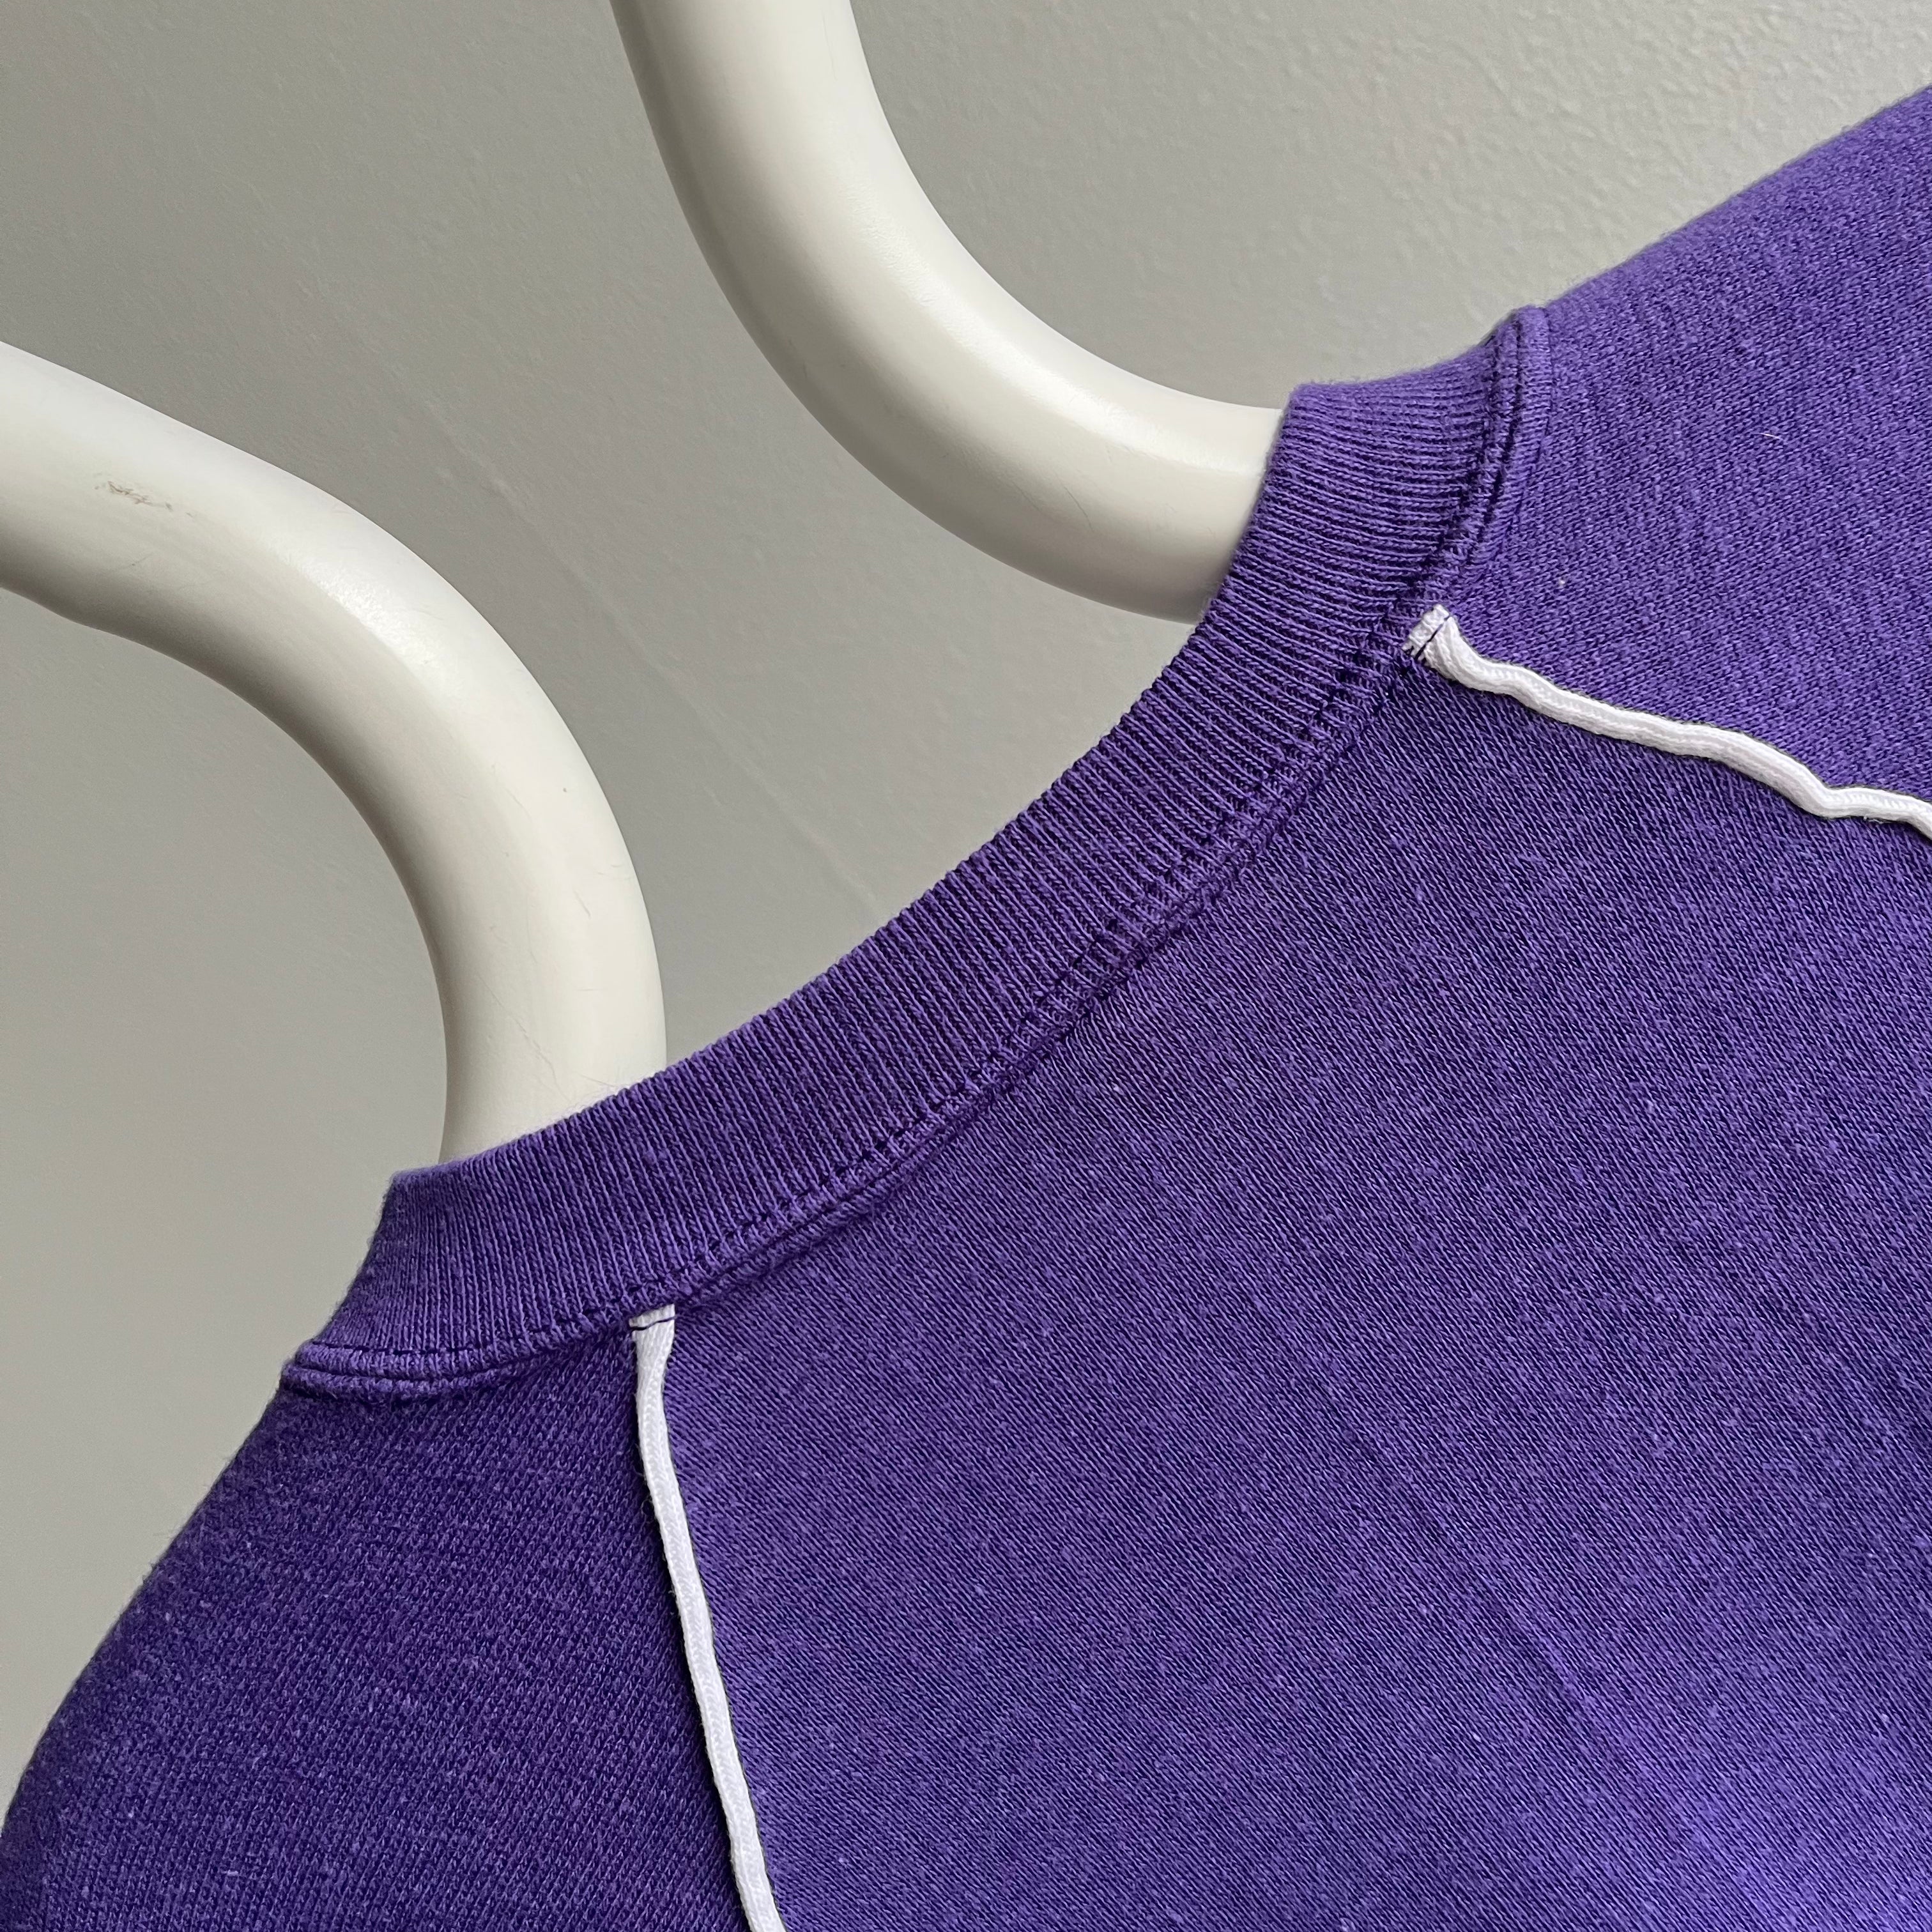 1980s Smaller Purple V-Neck Sweatshirt with White Piping - Never Worn